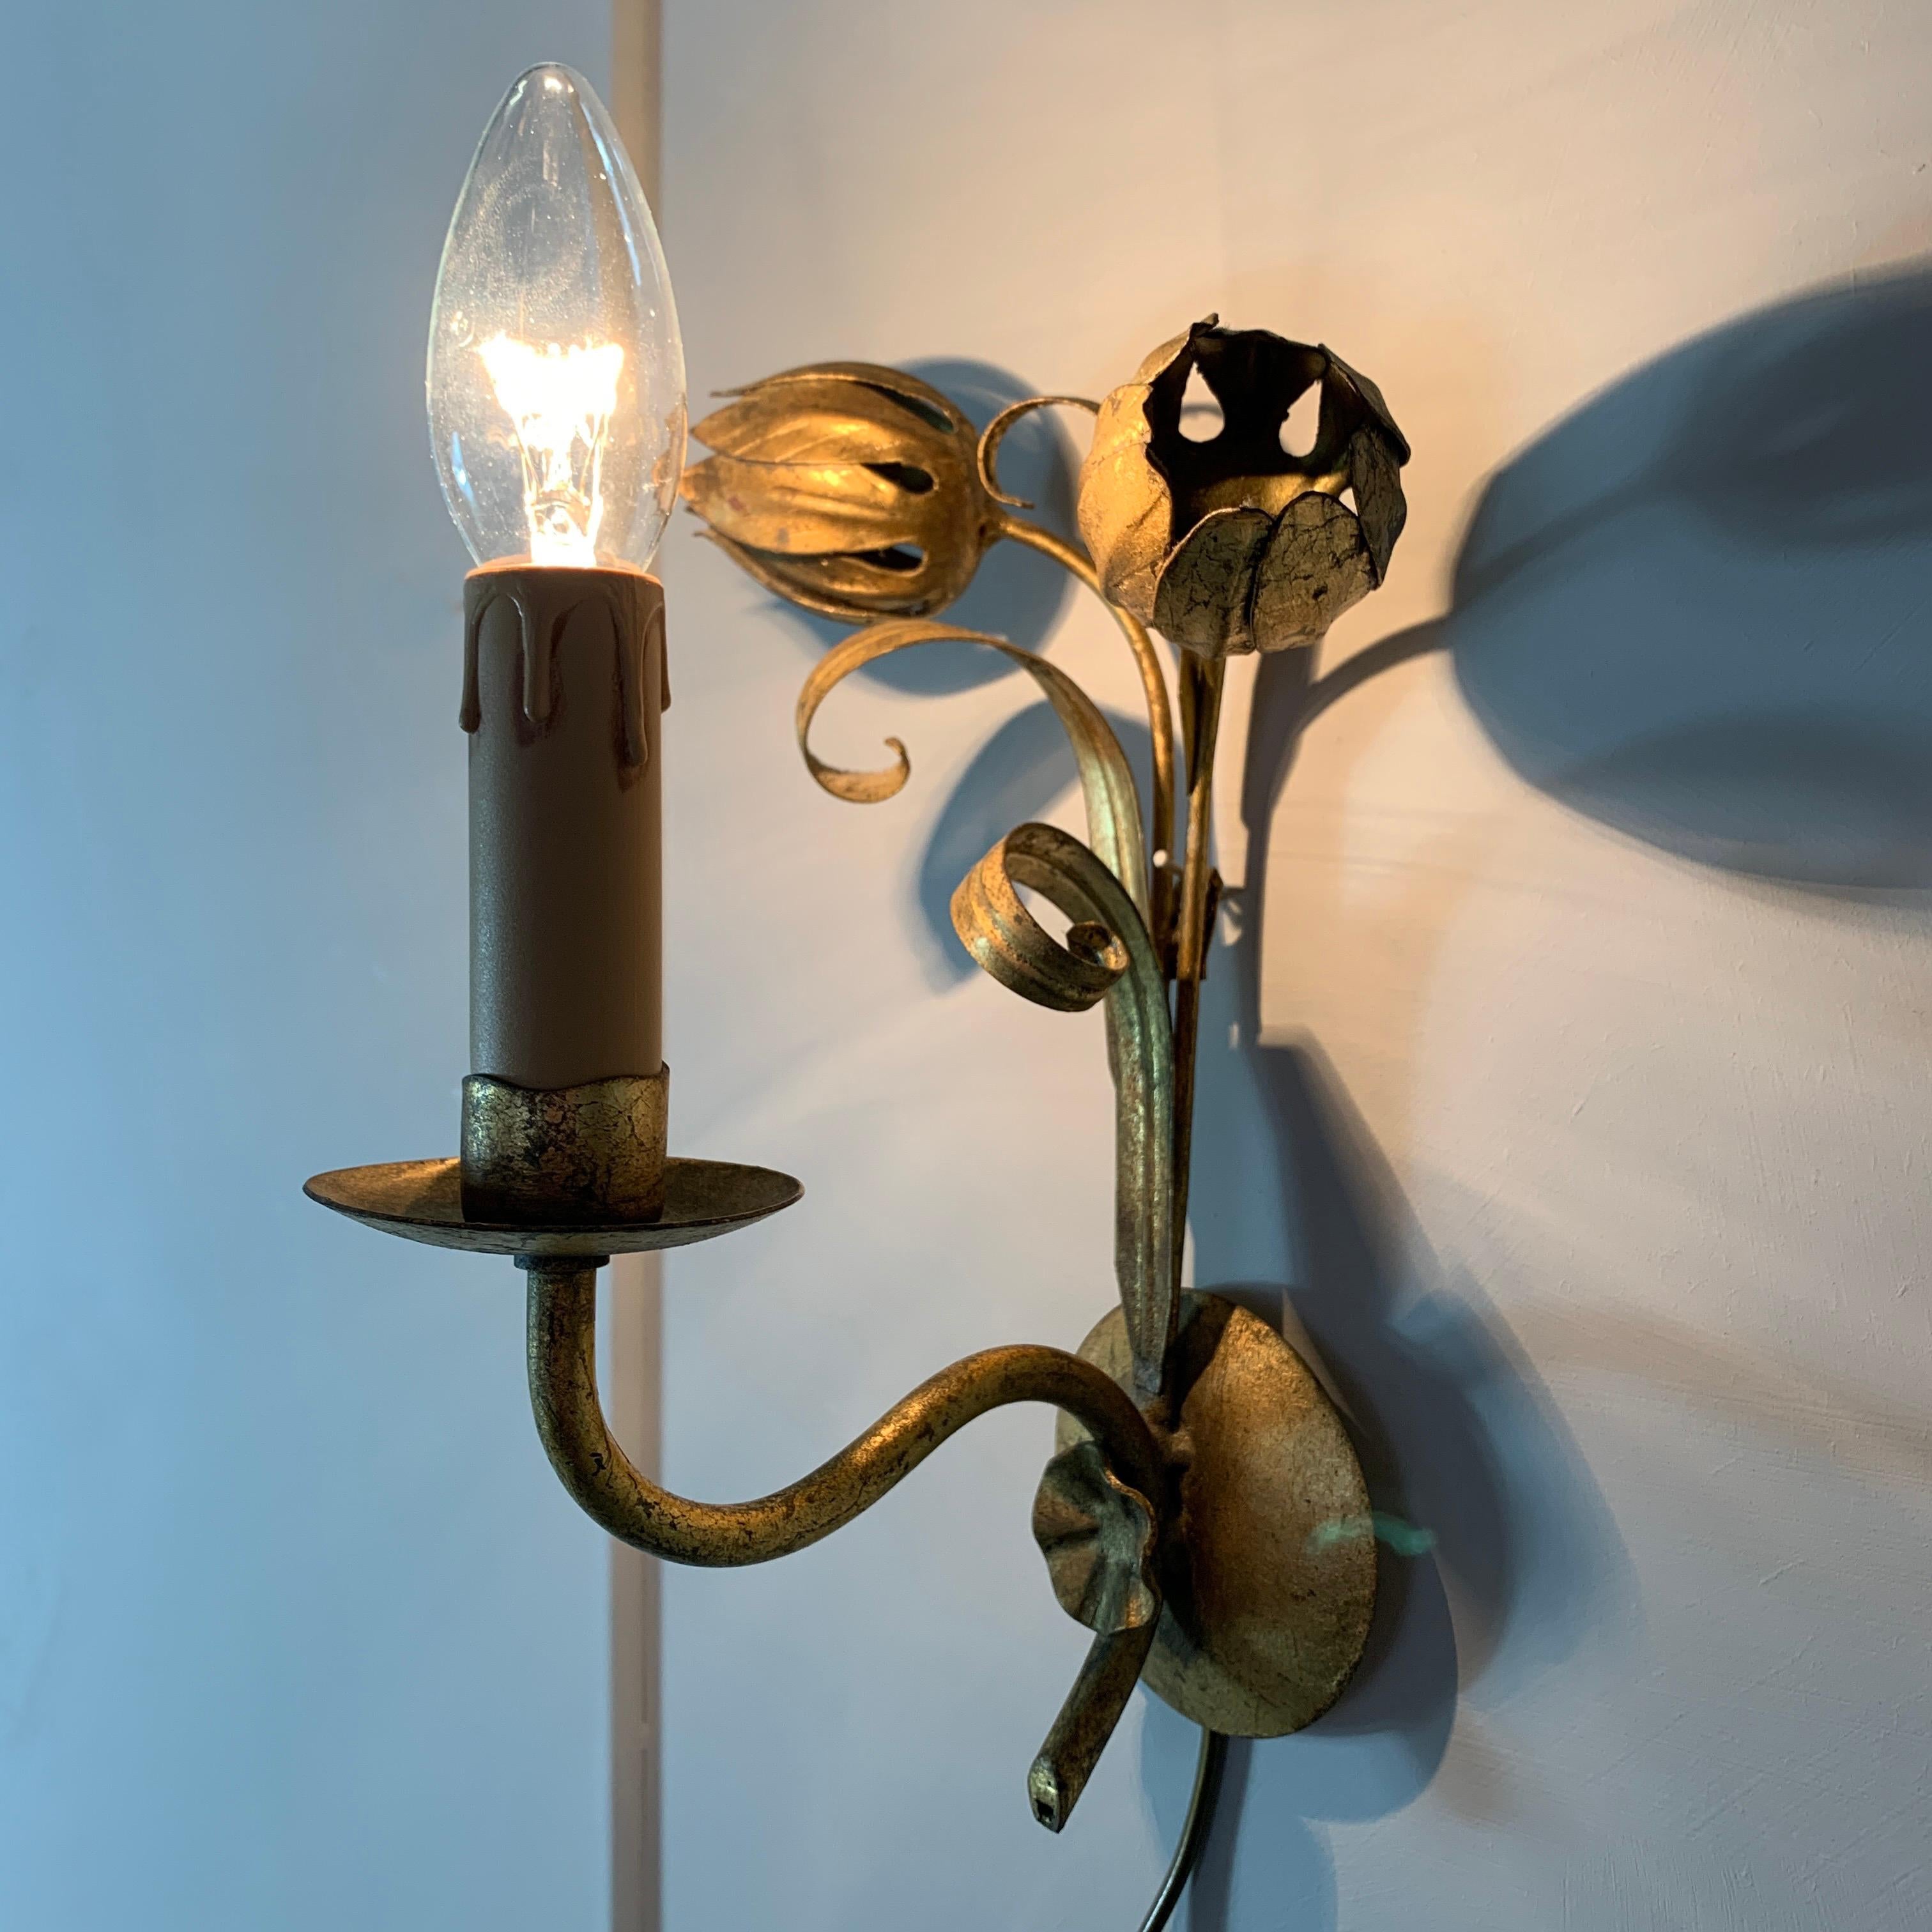 Midcentury flower bud gilt wall lights
circa 1960s, France
Pretty lights with double gilt buds and leaf design
Single bulb holder E14 to each light
Re-wired, new lamp holders and pat tested
Original gilt/gold leaf finish
Some wear to the